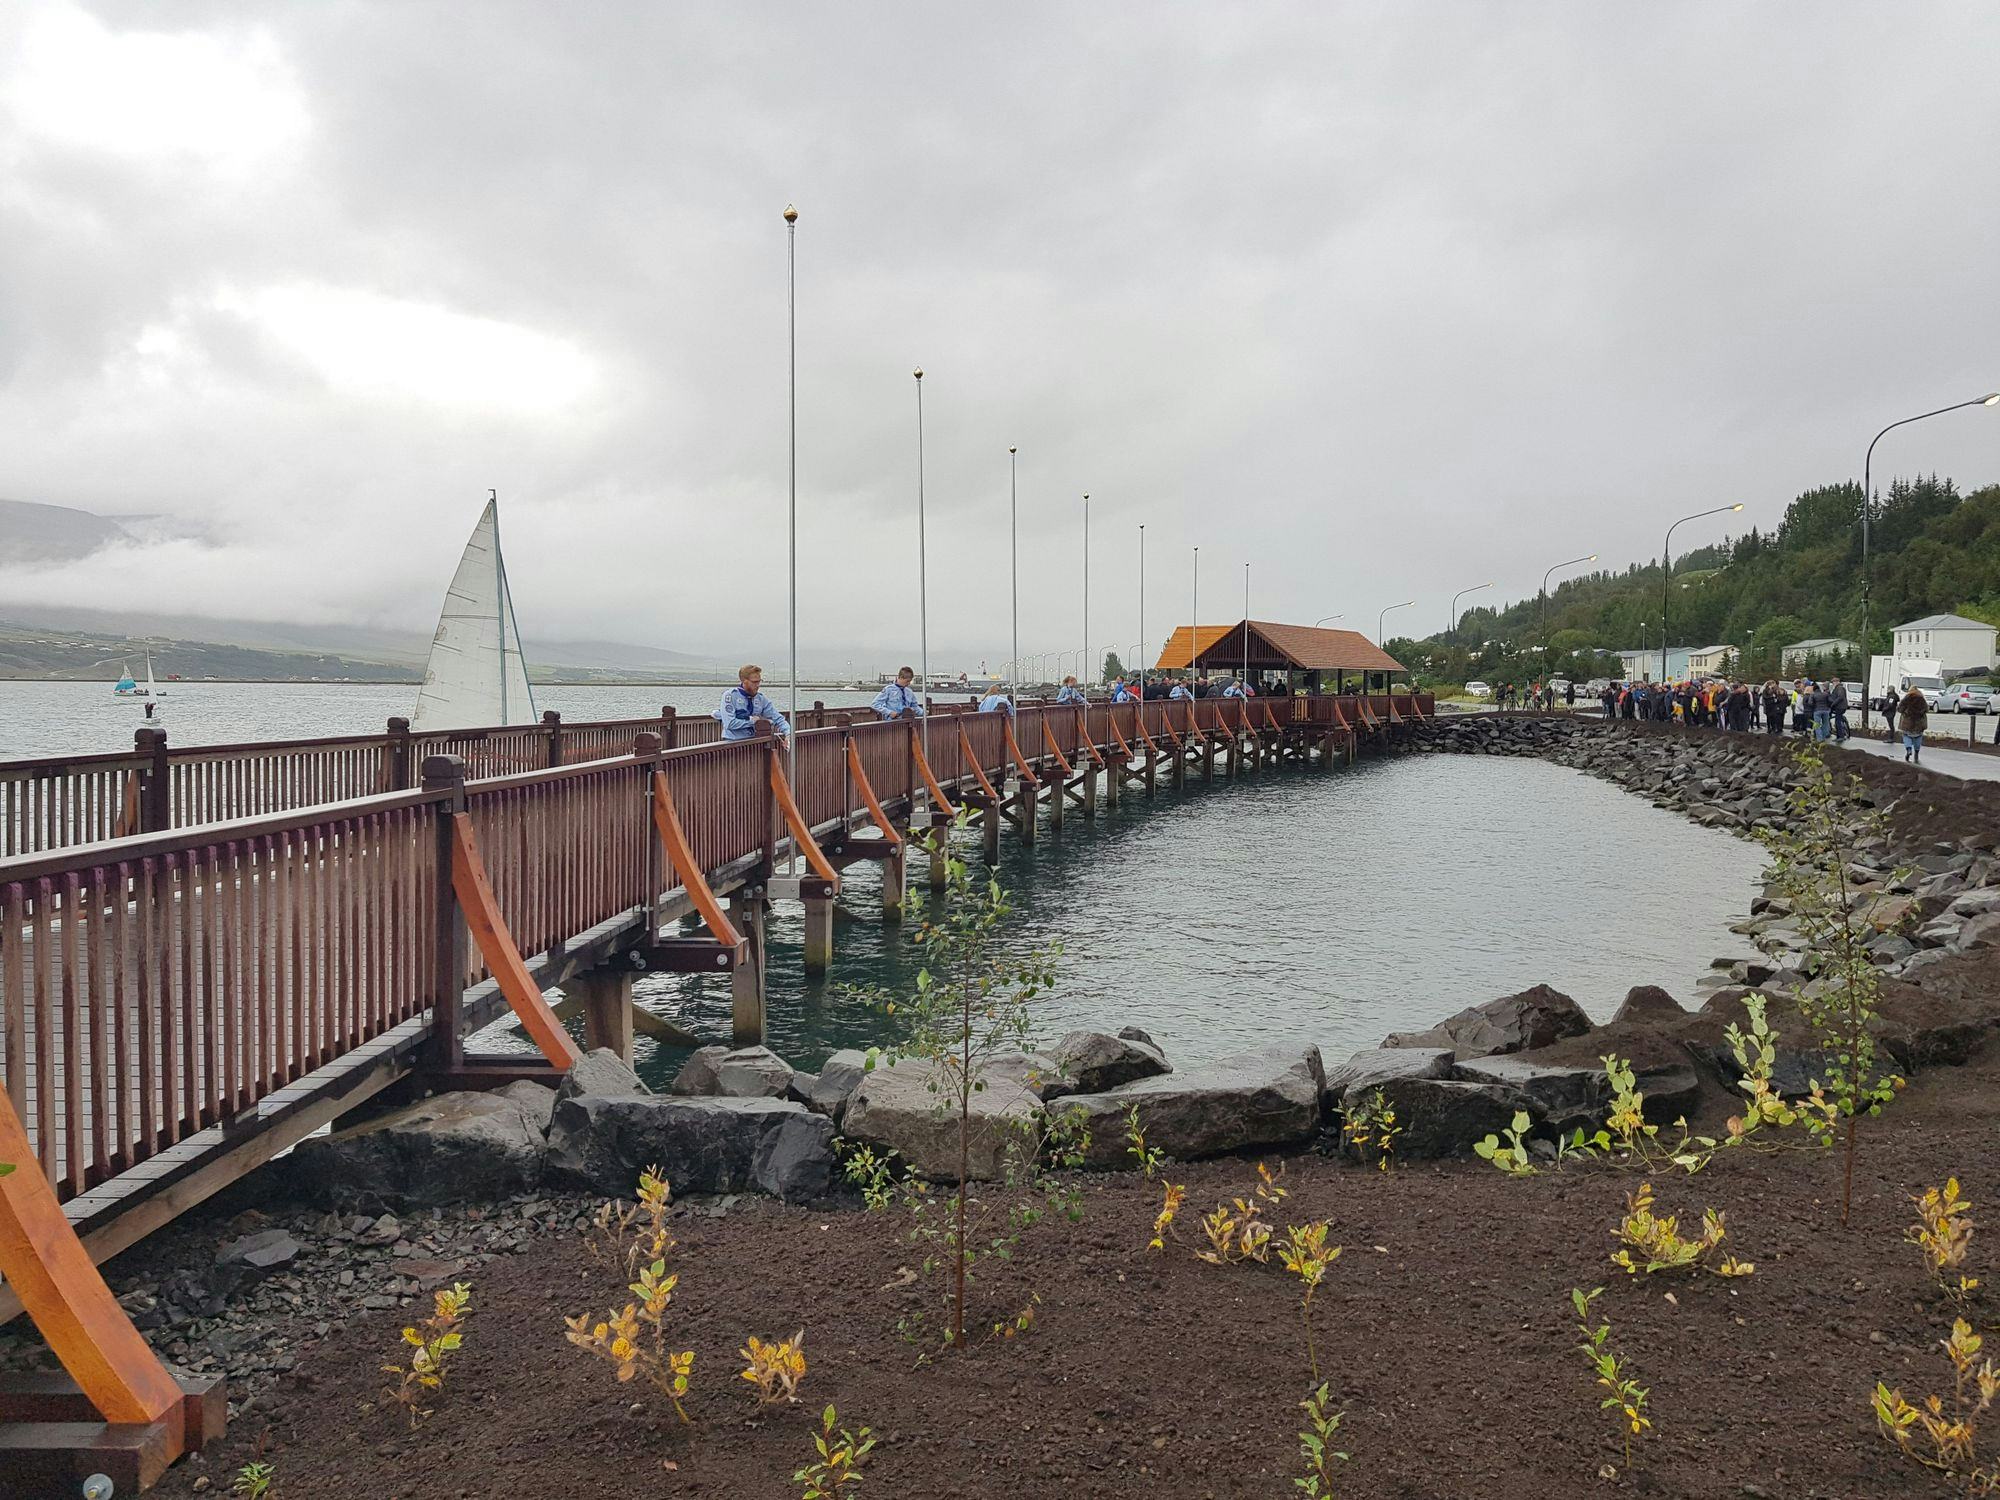 Woodend pedestrian bridge extended over a body of water